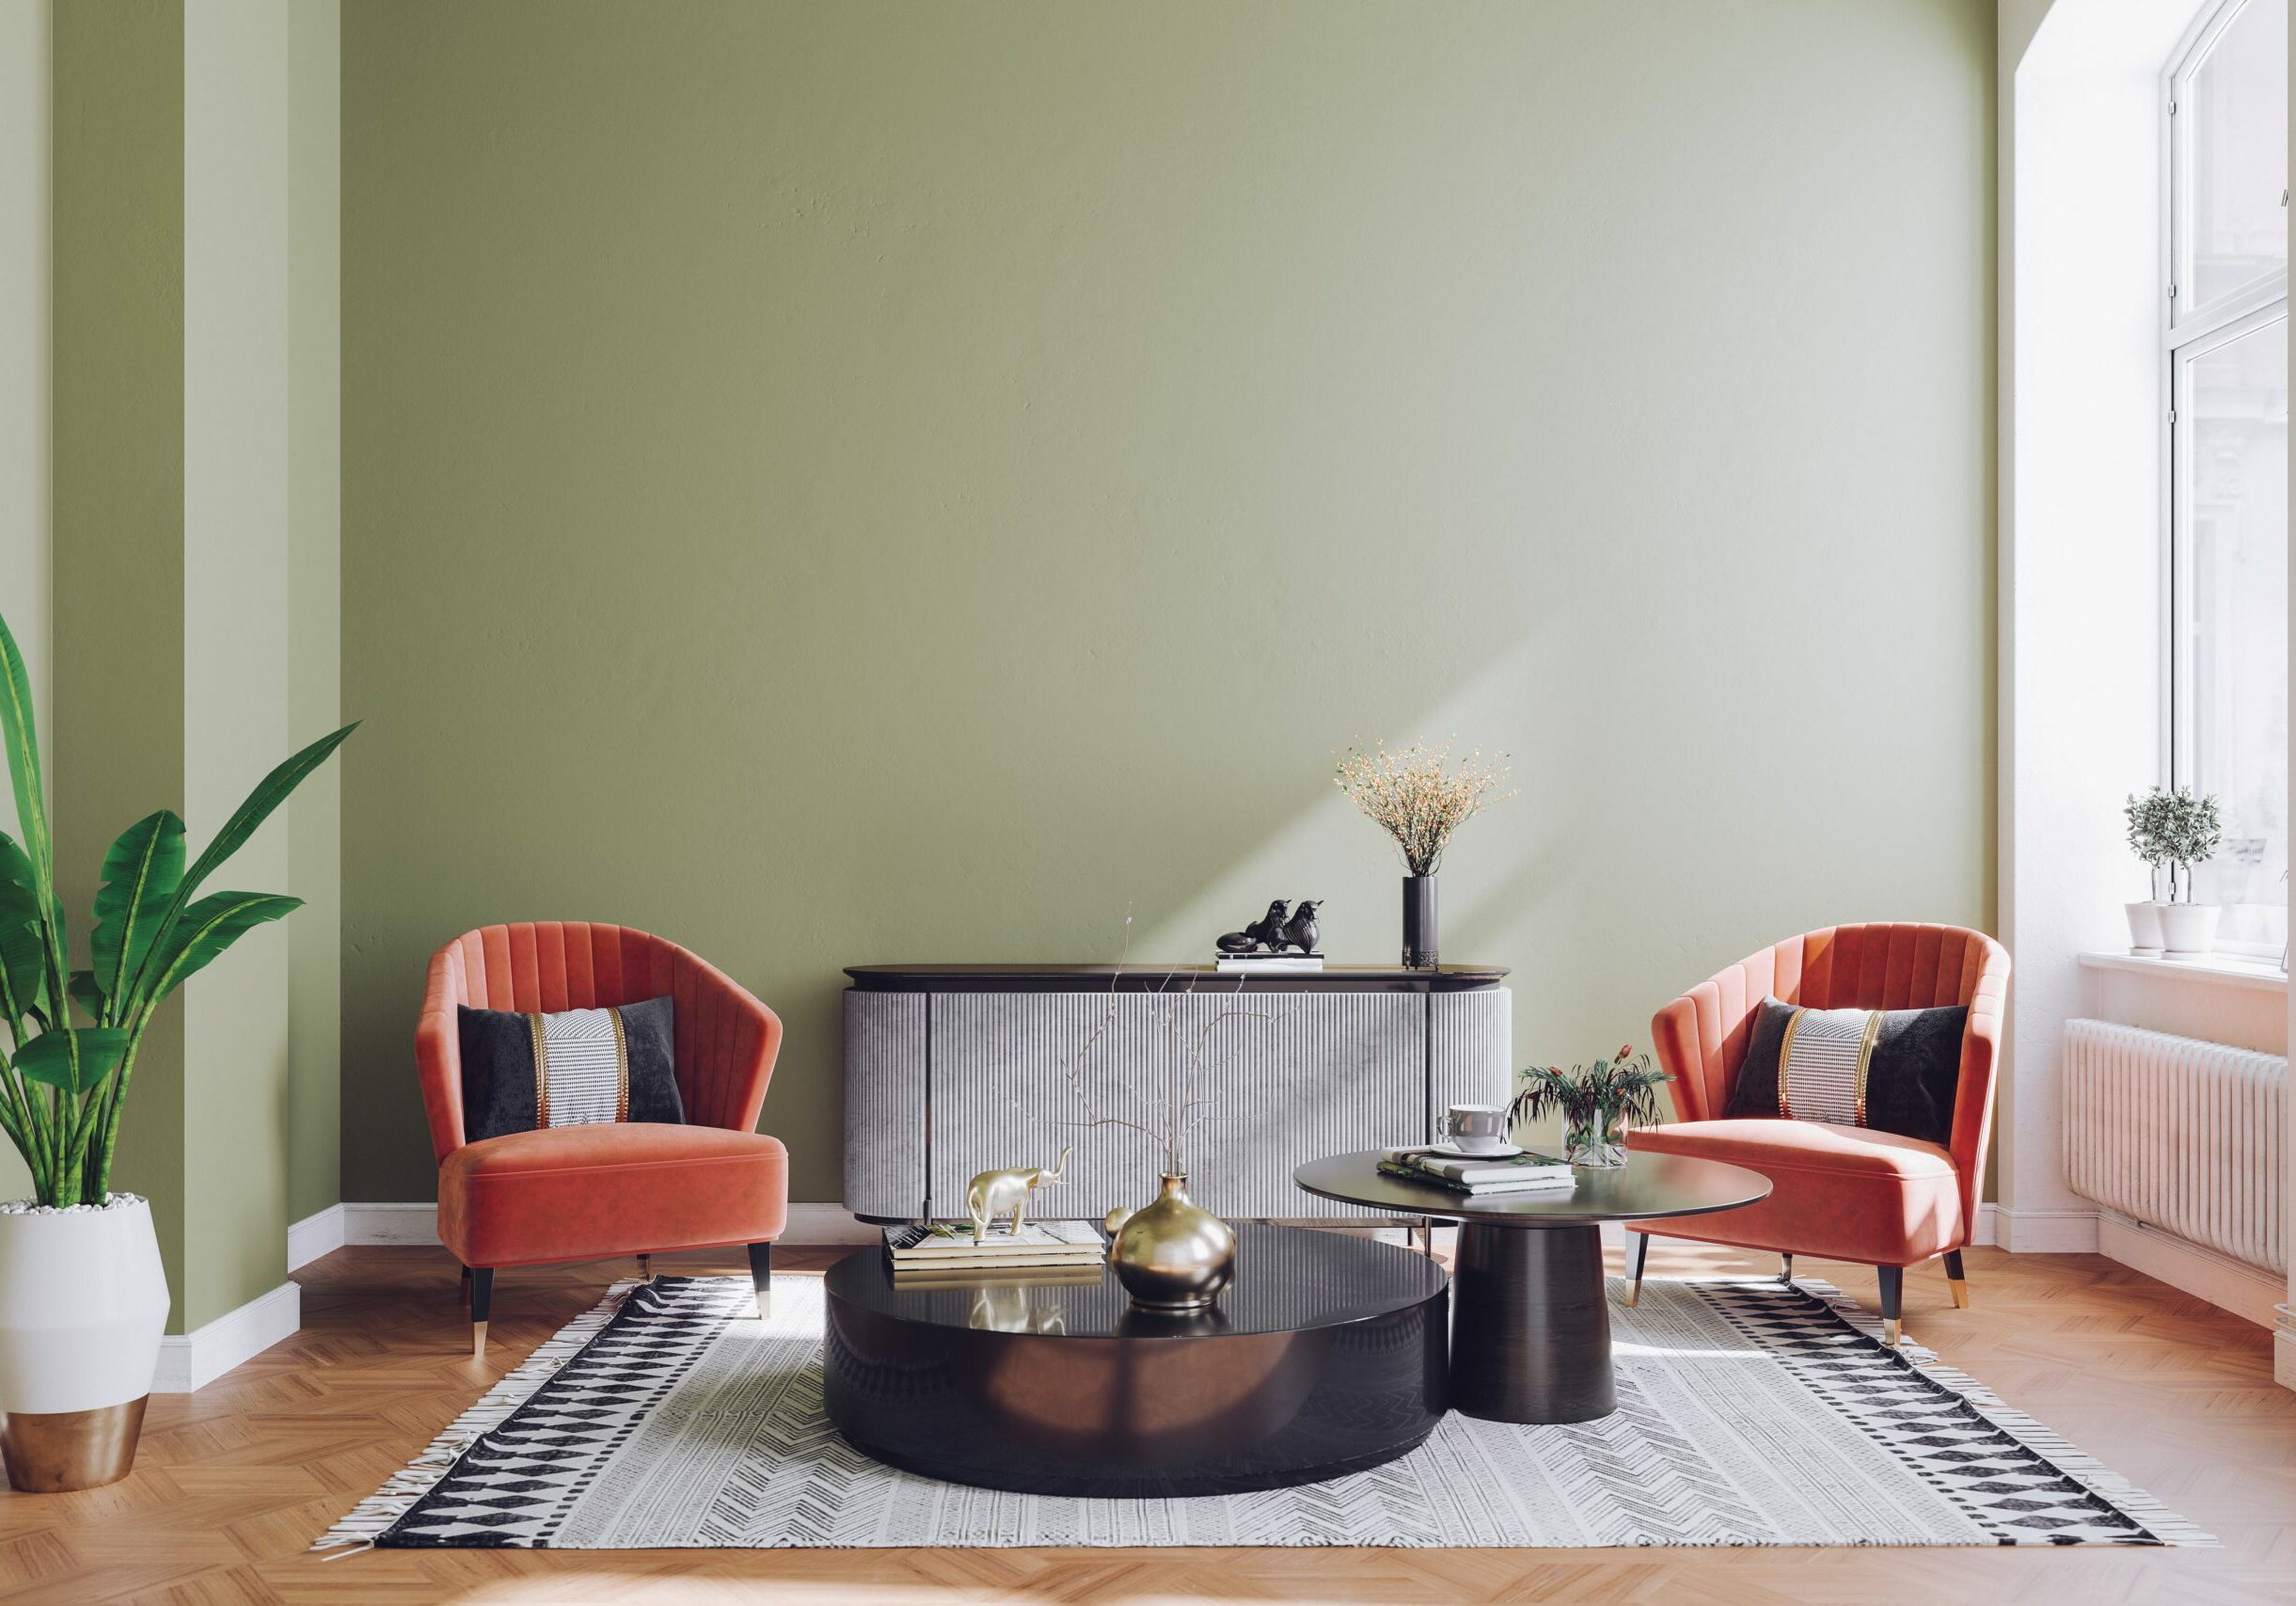 Modern mid century living room interior with pastel colors.